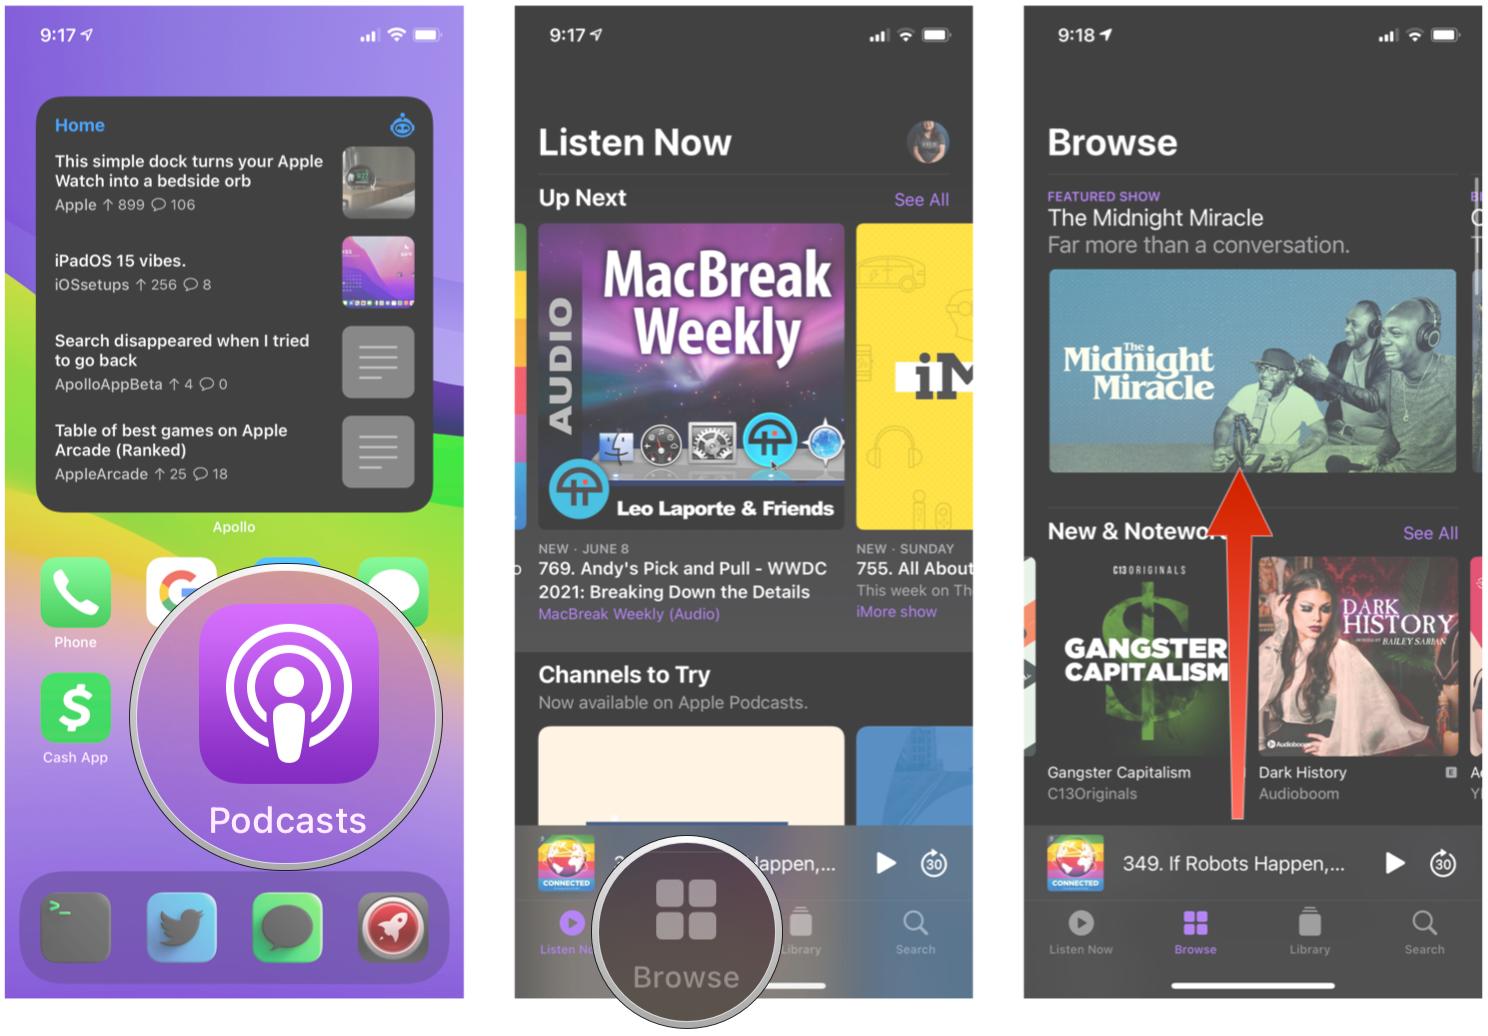 Subscribe to a podcast in the Podcasts app on iPhone by showing: Launch Podcasts, tap Browse, scroll down